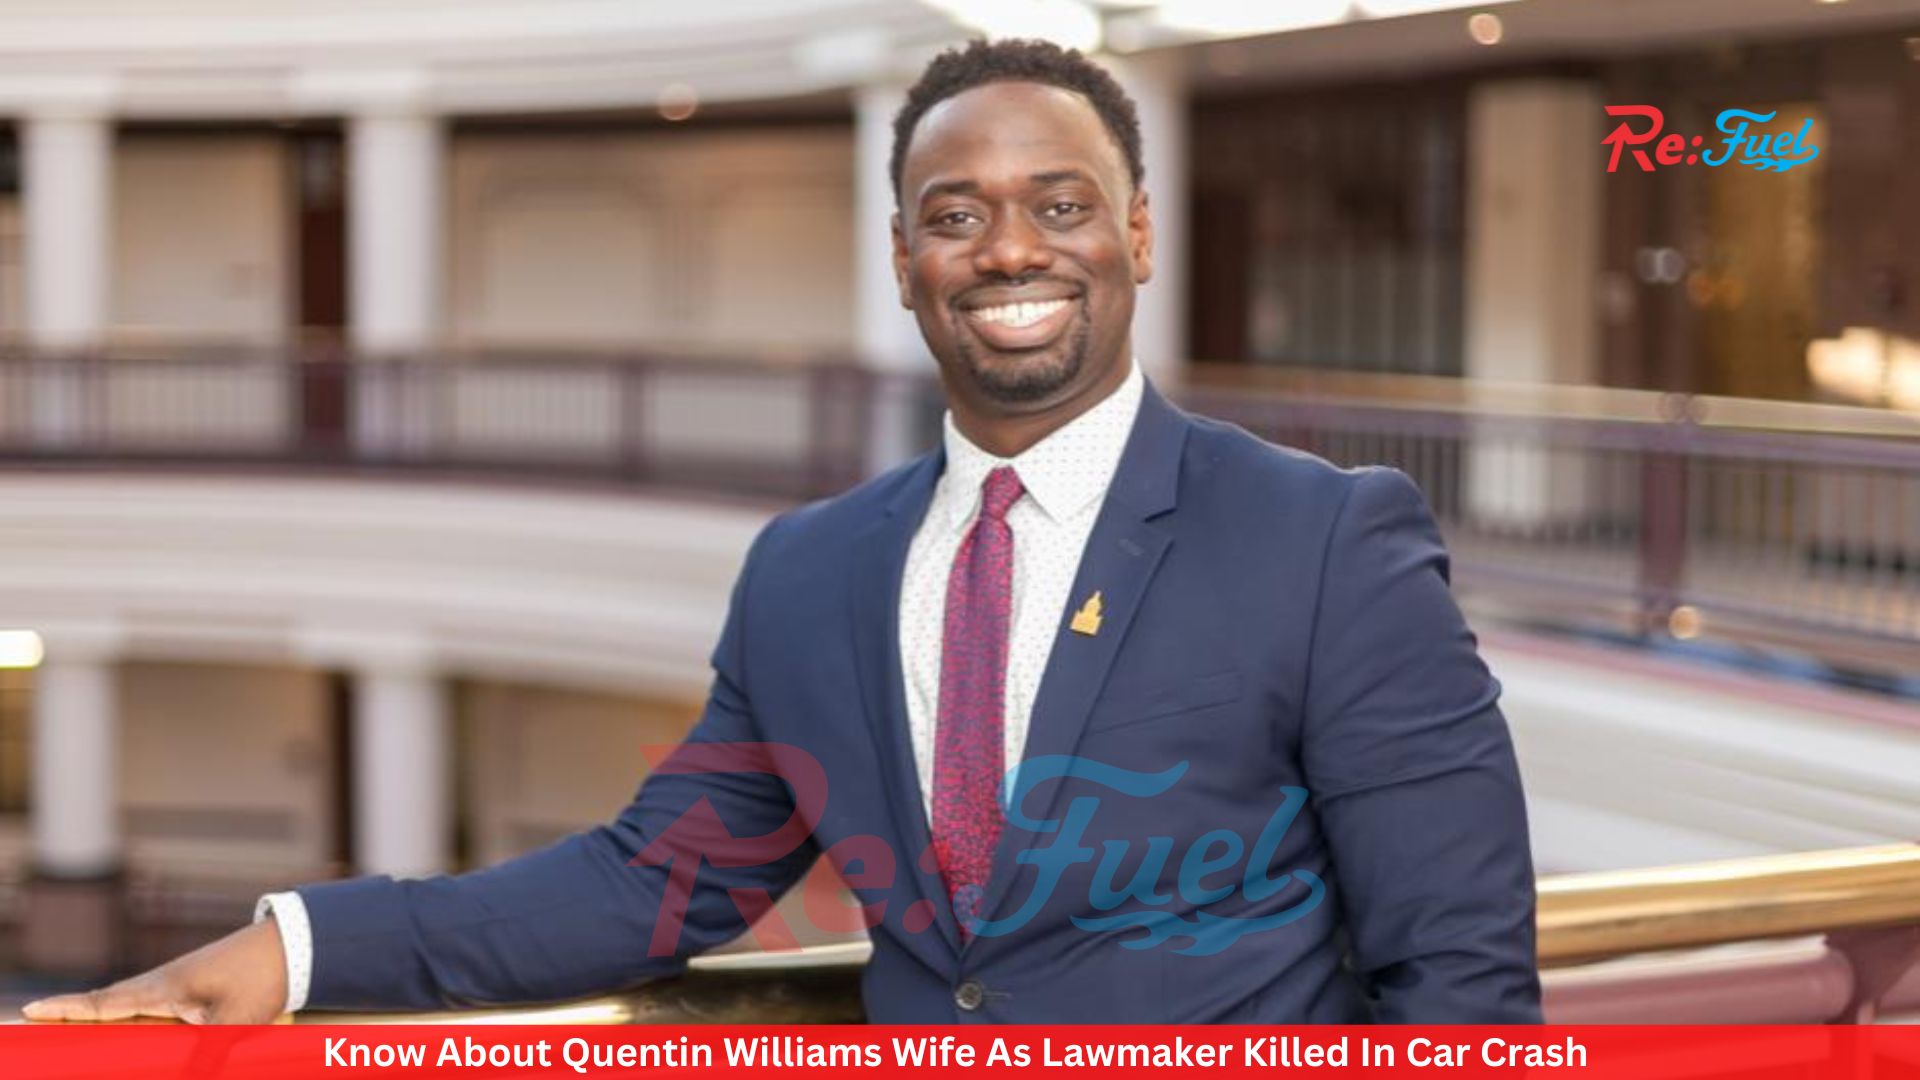 Know About Quentin Williams Wife As Lawmaker Killed In Car Crash